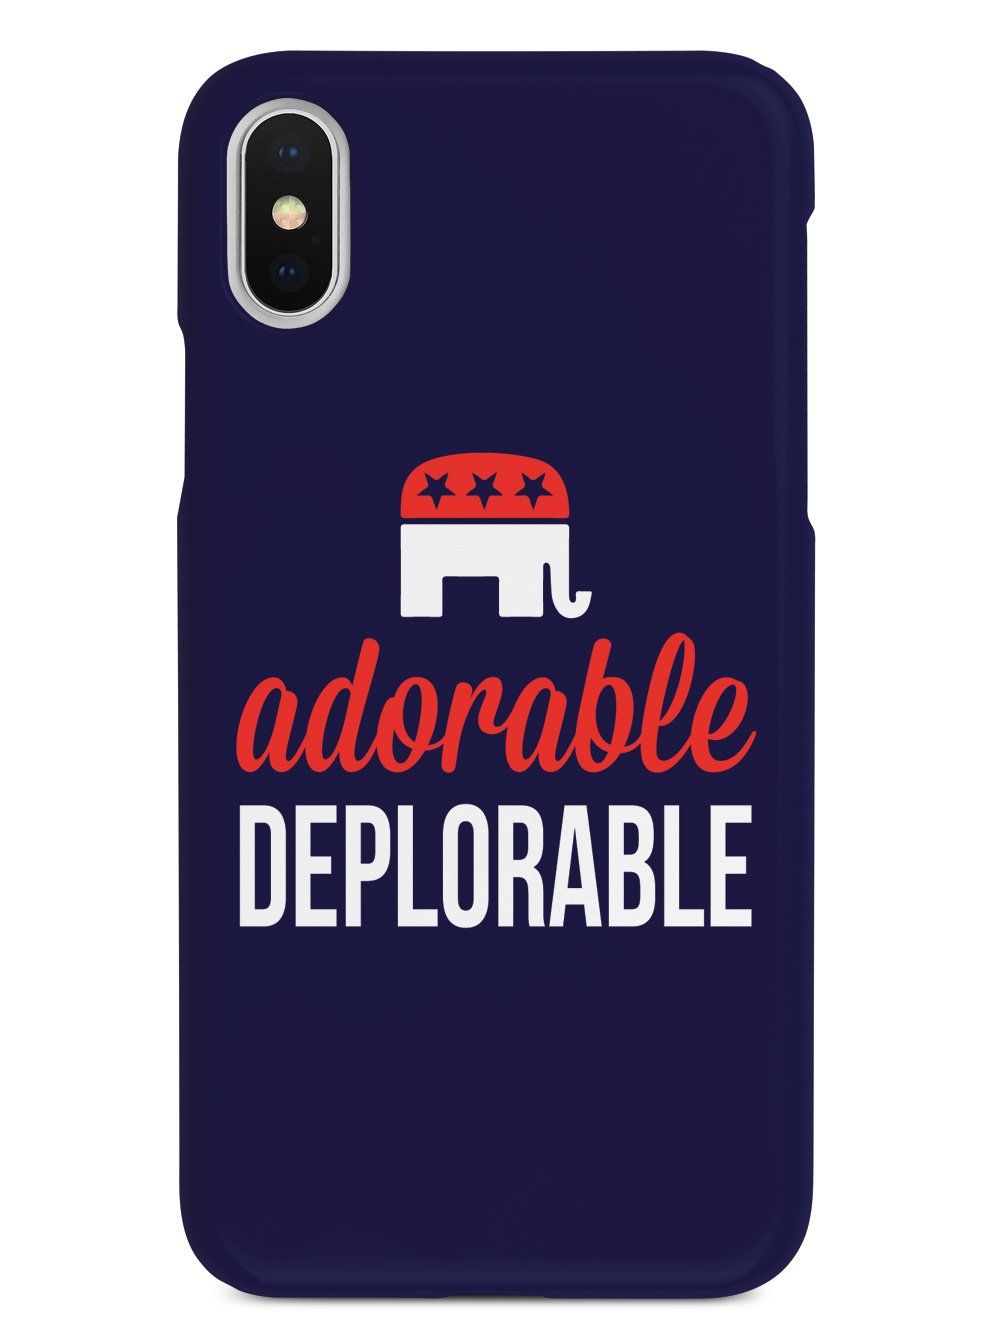 Adorable Deplorable - Red, White, and Blue Case